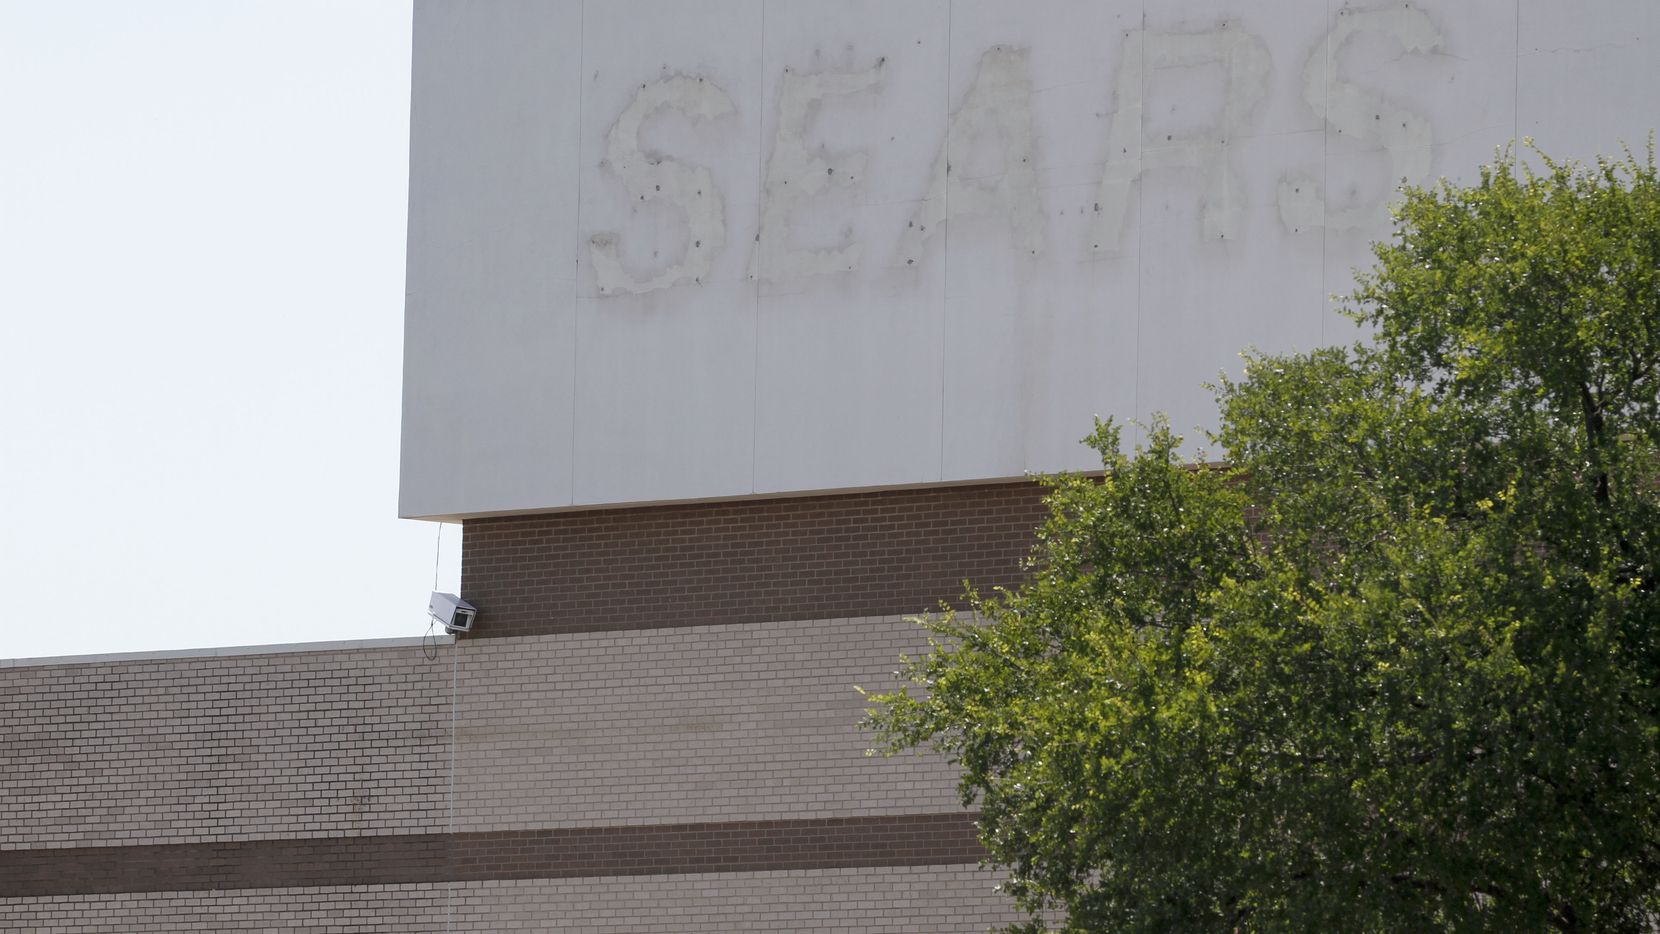 The outline of SEARS can be seen on the exterior of RedBird Mall in southern Dallas. UT Southwestern will lease 150,000 square feet to create a major medical center and bring much-needed health services to that part of the city.